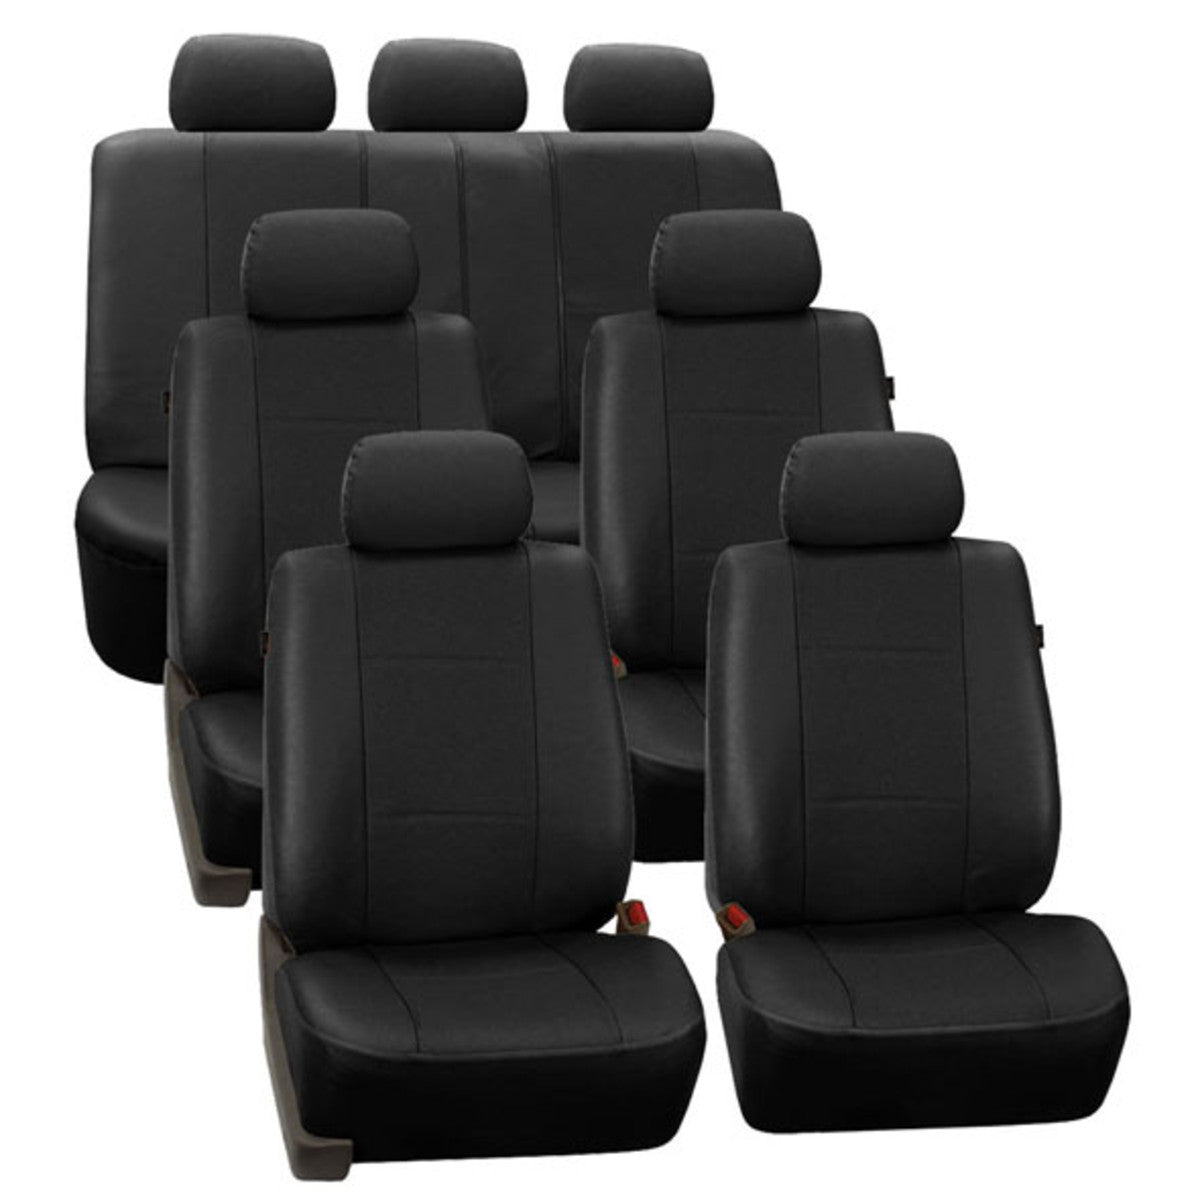 Deluxe Leatherette 3 Row Seat Covers Black